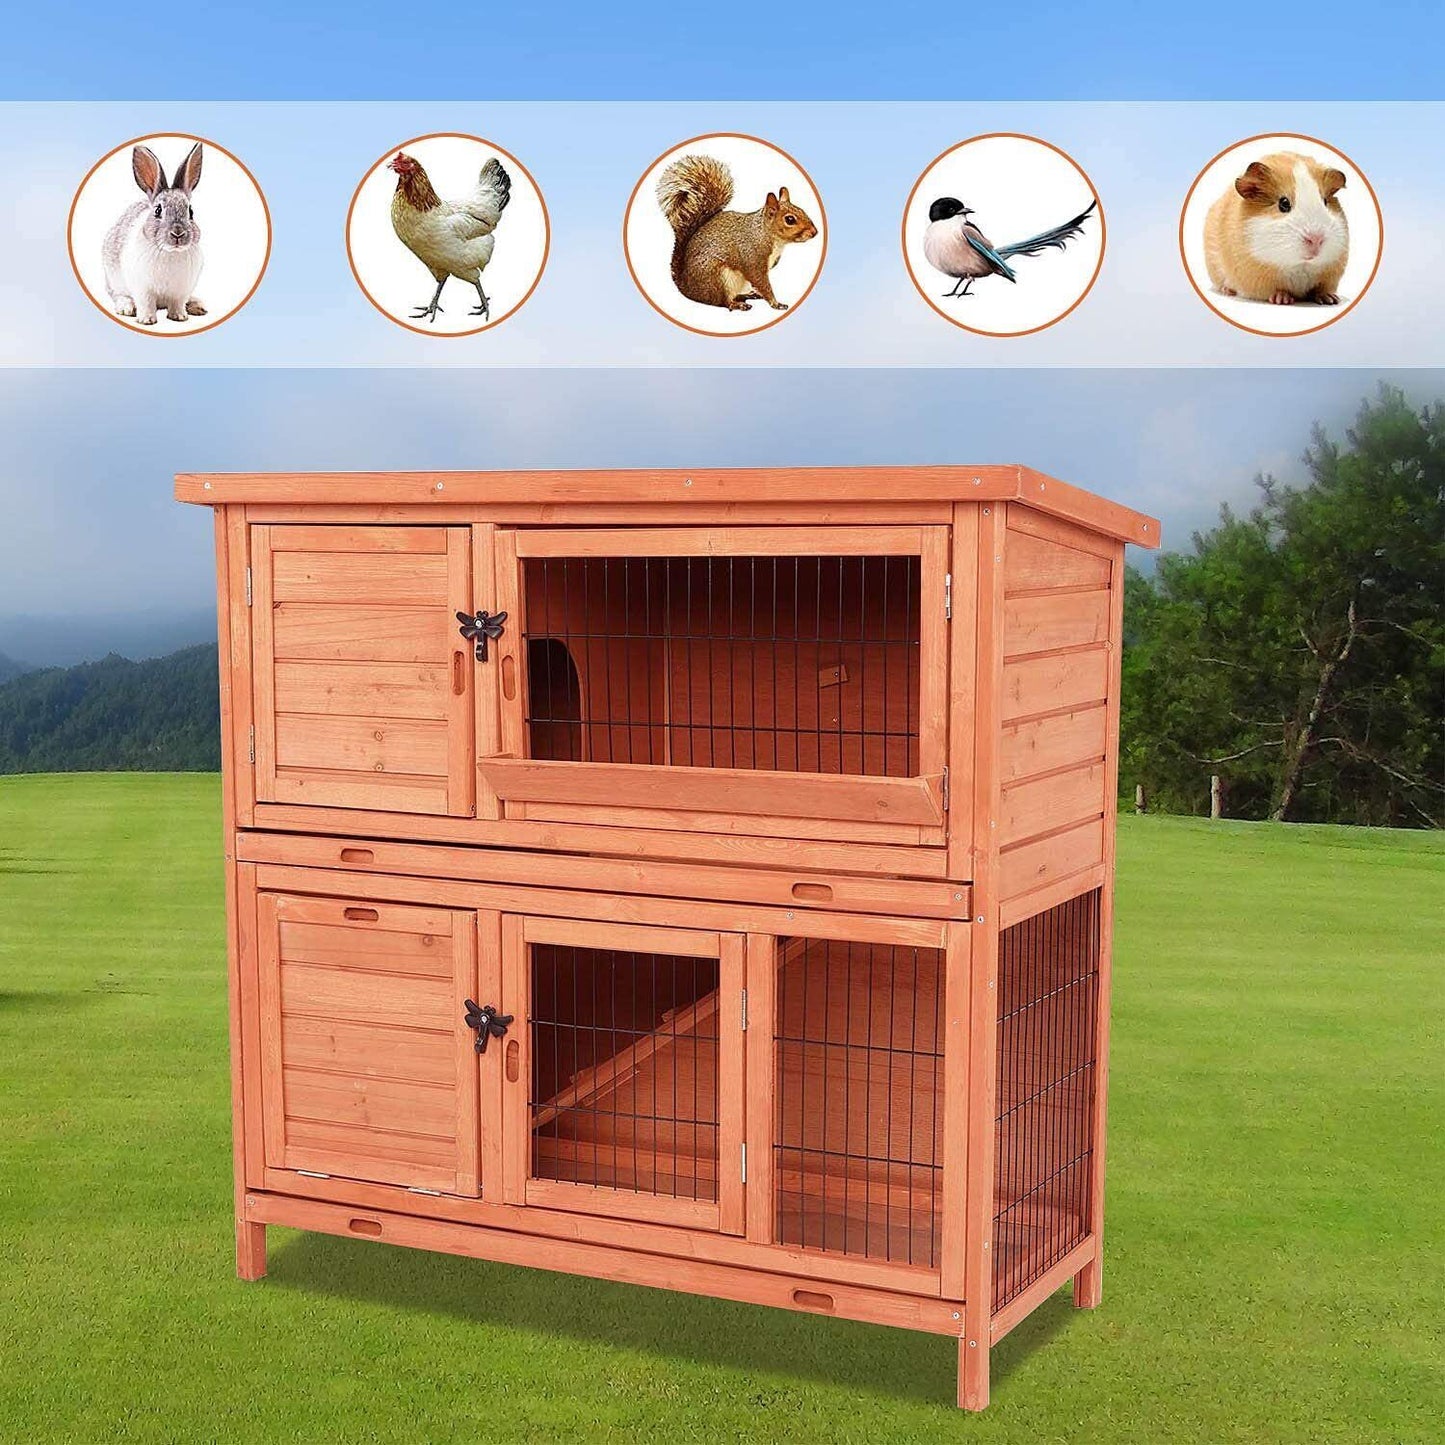 Arlopu 42.3'' Rabbit Hutch, Wooden Bunny Hutch Poultry Cage Indoor Outdoor Backyard Small Animals House